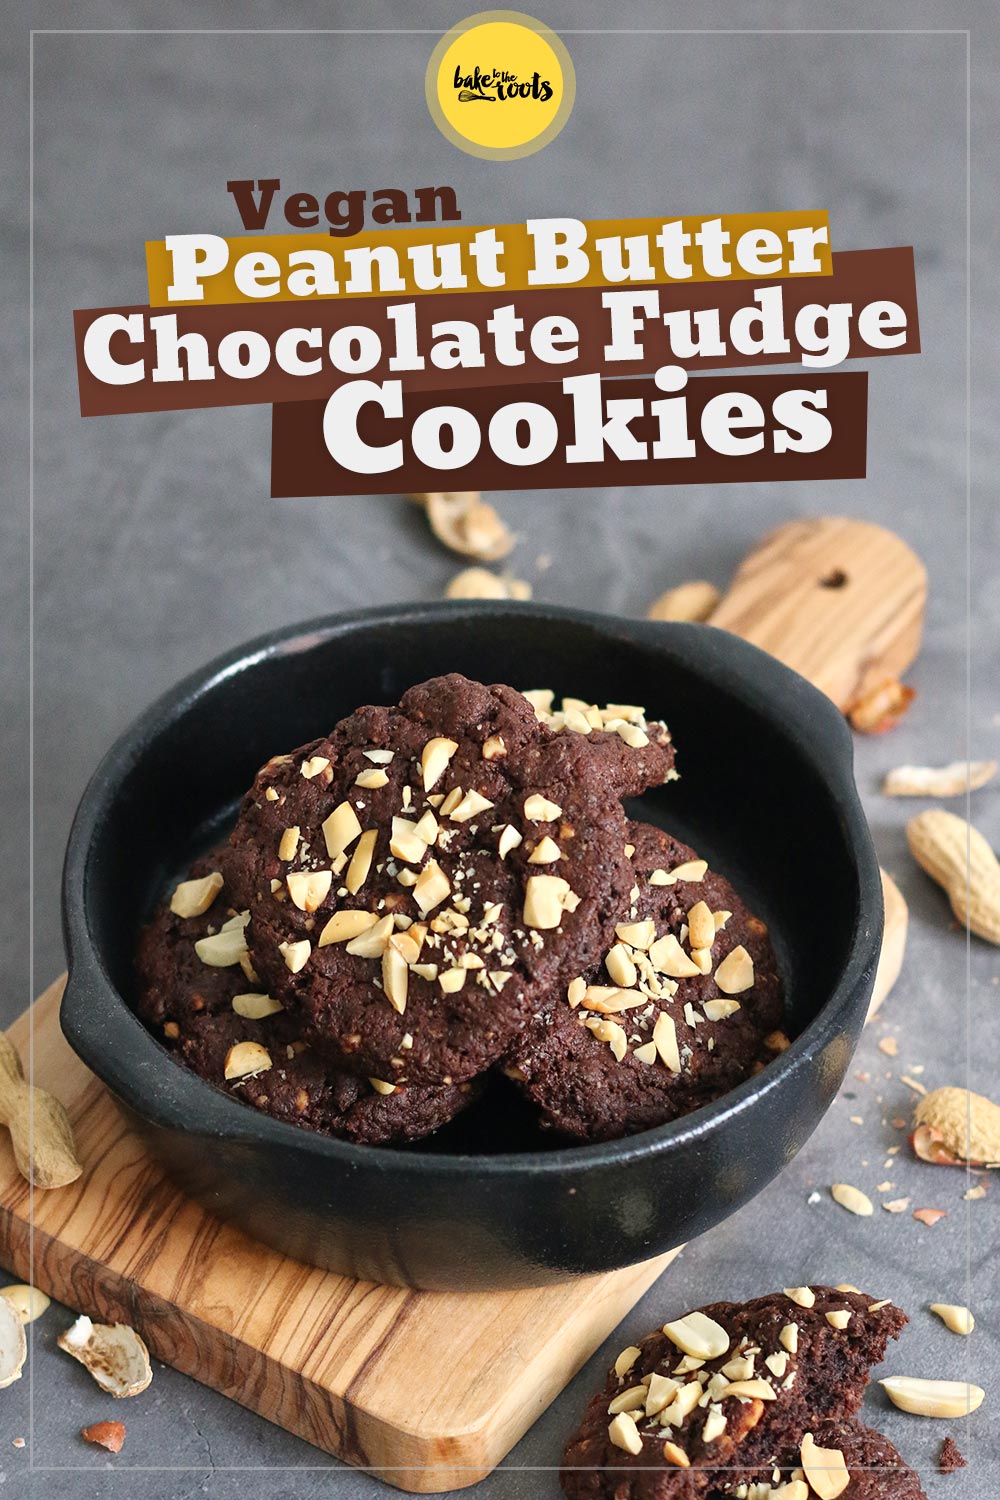 Vegan Peanut Butter Chocolate Fudge Cookies | Bake to the roots